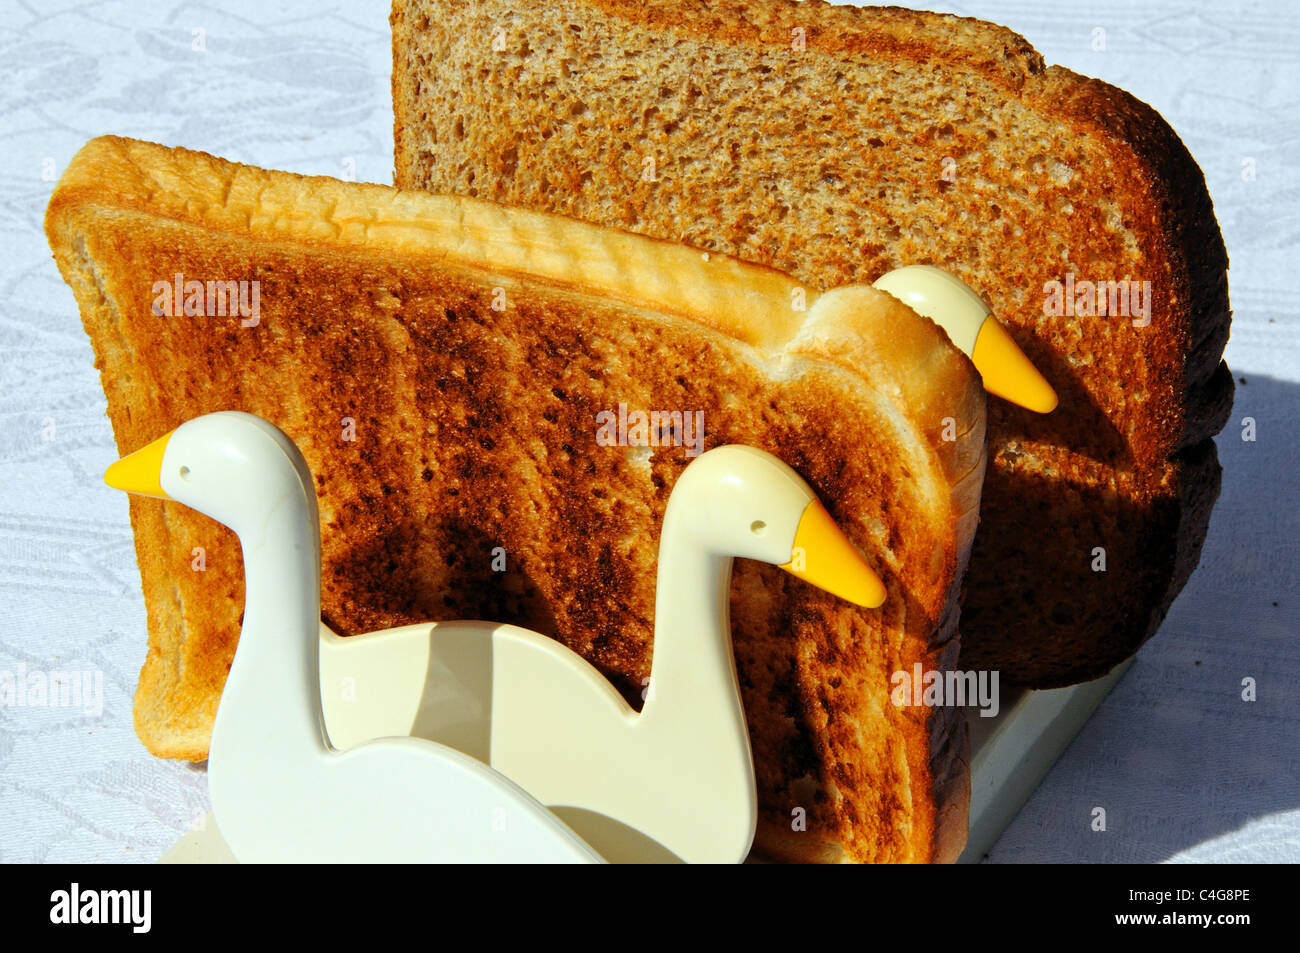 https://c8.alamy.com/comp/C4G8PE/two-slices-of-toast-in-a-novelty-goose-toast-rack-C4G8PE.jpg